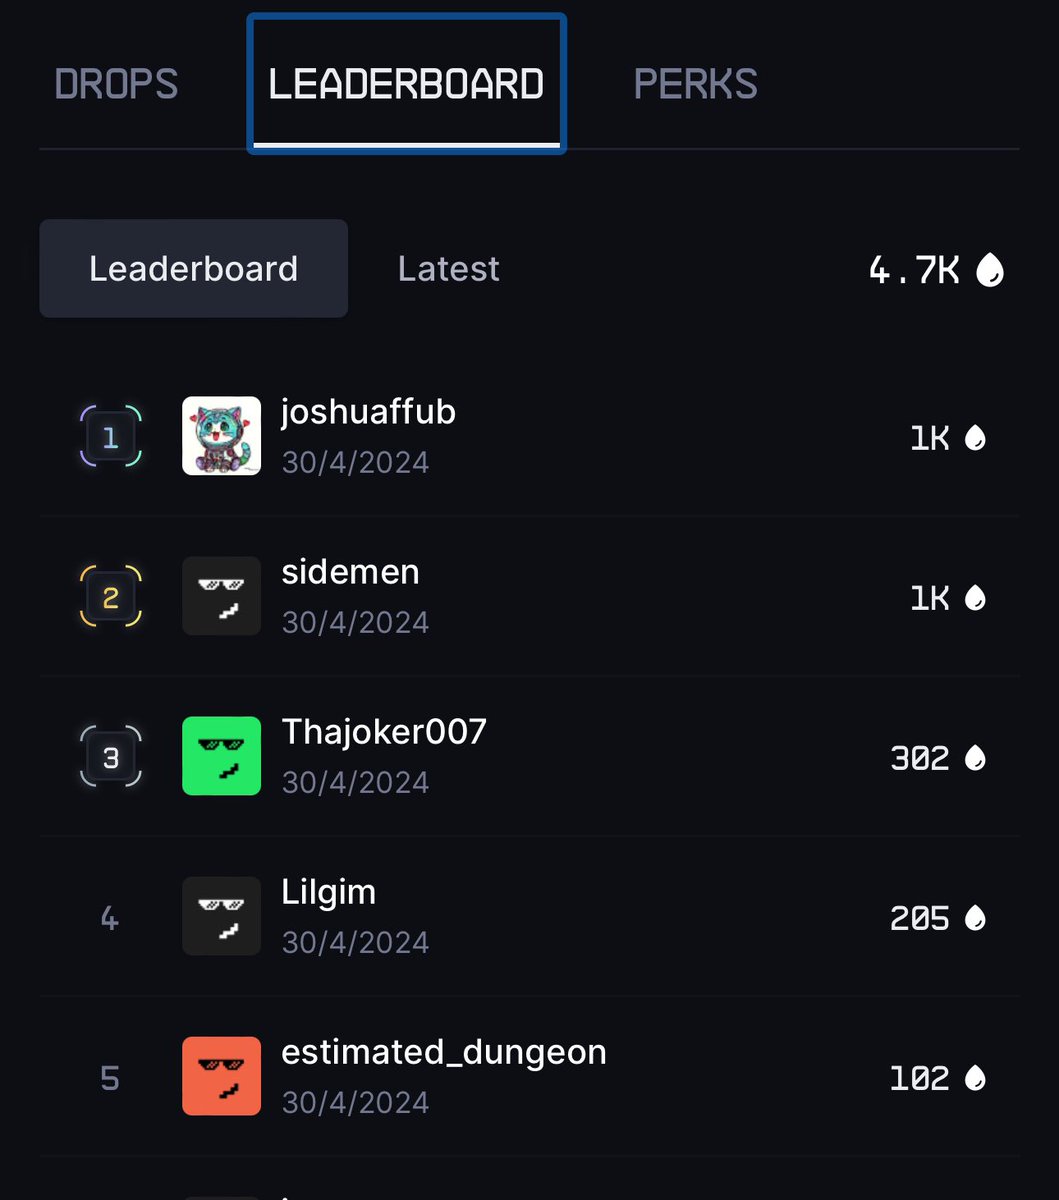 24 mins to get on this leaderboard before it’s too late! 4pm EST 🕰️ snapshot time